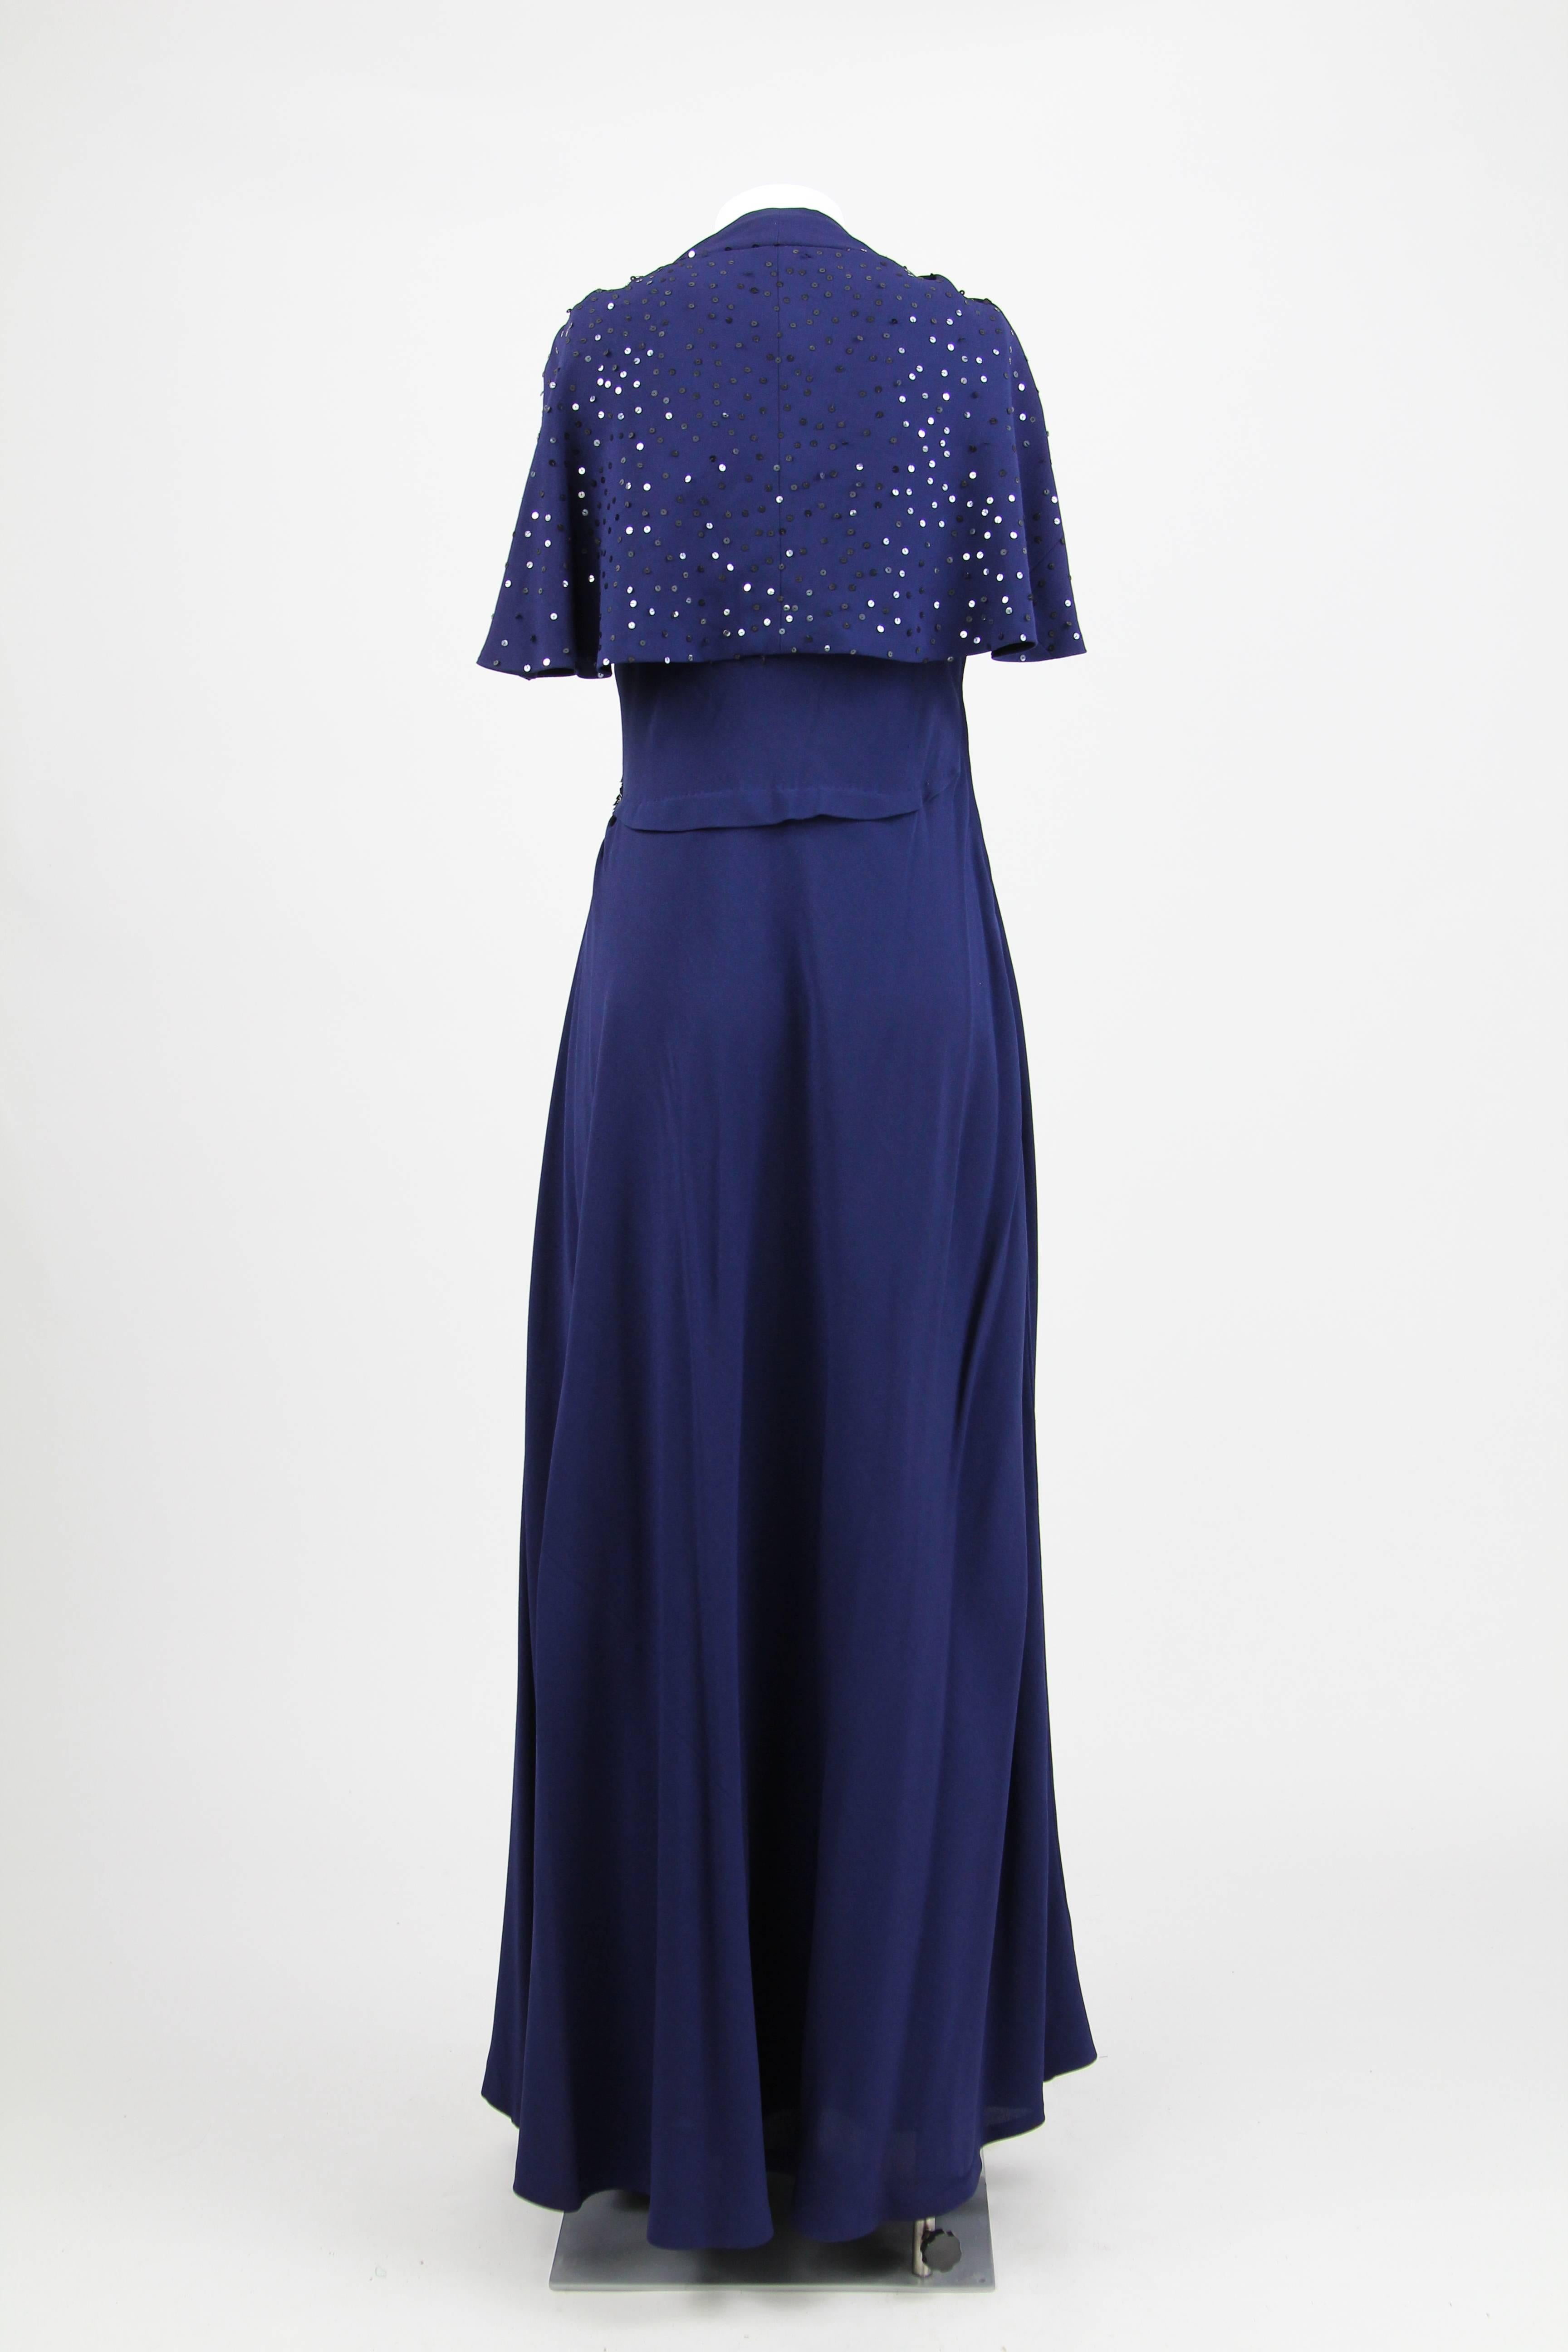 A.N.G.E.L.O. Vintage - Italy

Elegant dark blue draped evening dress, featuring sequin embellishments and a back cut - out covered by an integrated shawl. Carefully handmade in Italy.

Viscose fabric.

Size 40 IT.